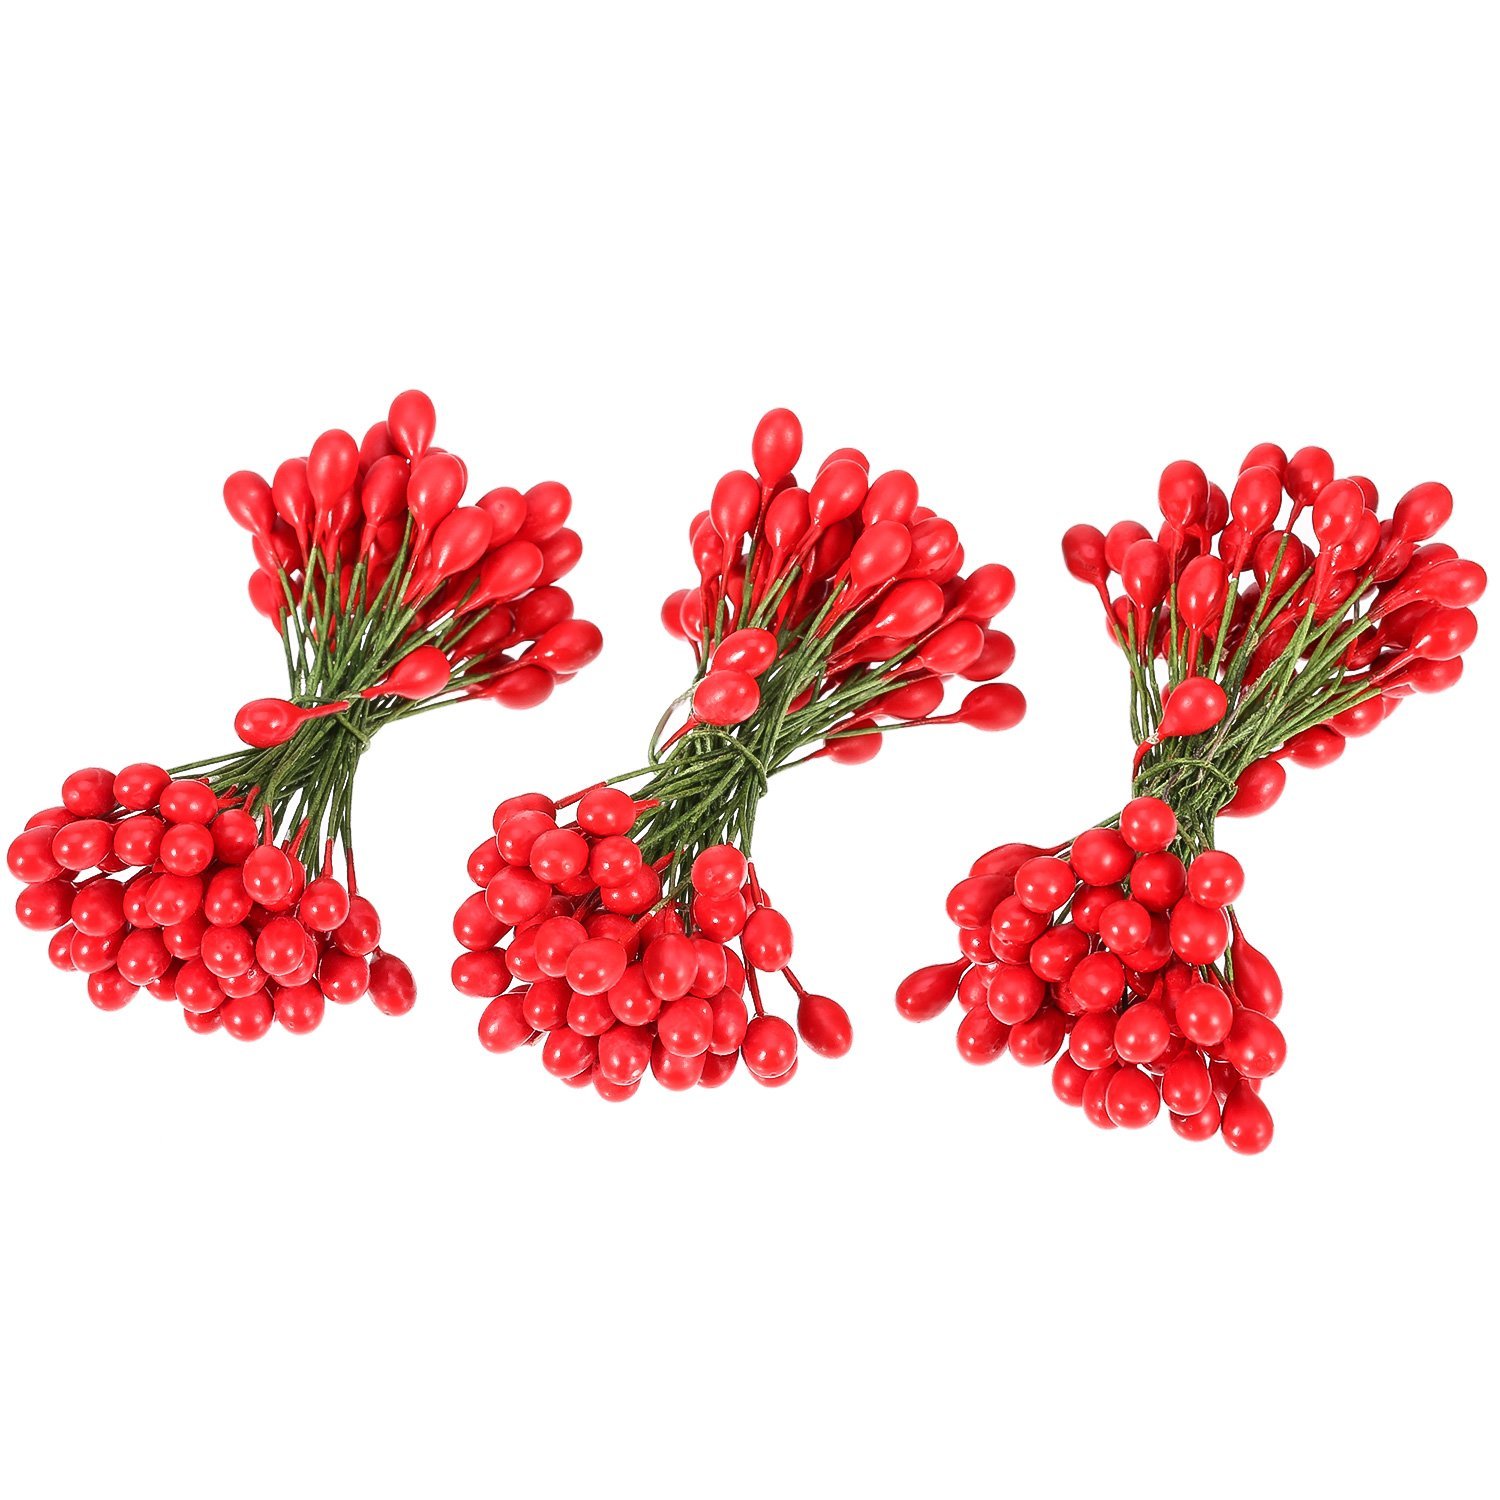 300 Pieces Artificial Holly Christmas Fake Berries On 150 Wire Stems For Christm - $17.99